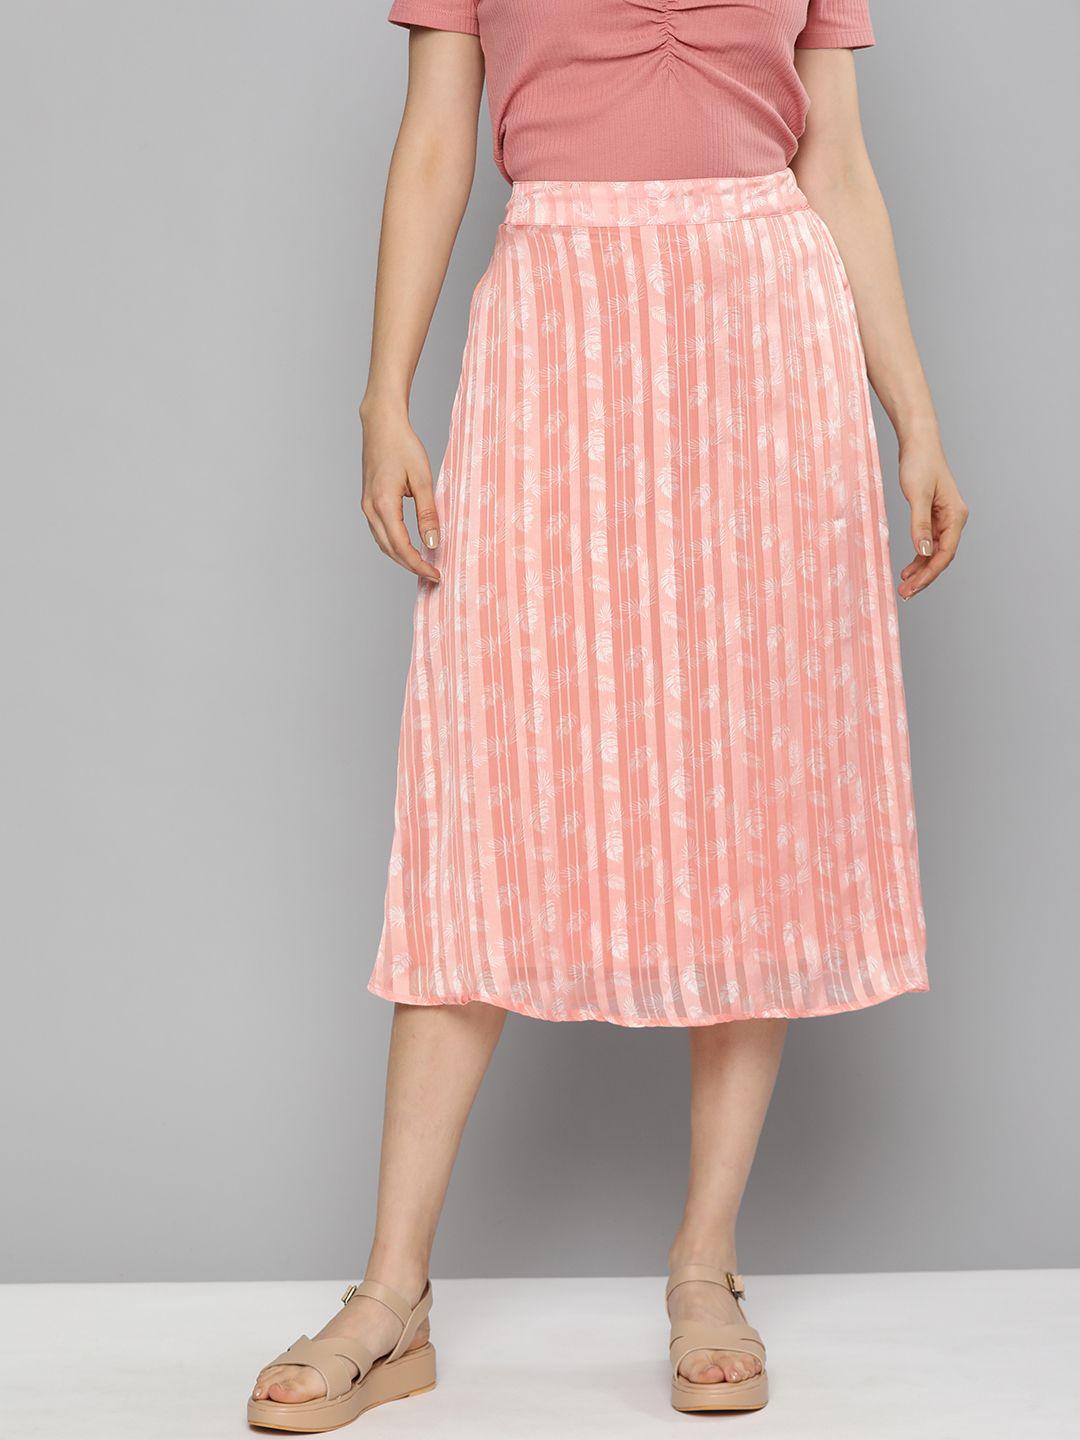 mast-&-harbour-women-coral-&-white-floral-printed-a-line-midi-skirts